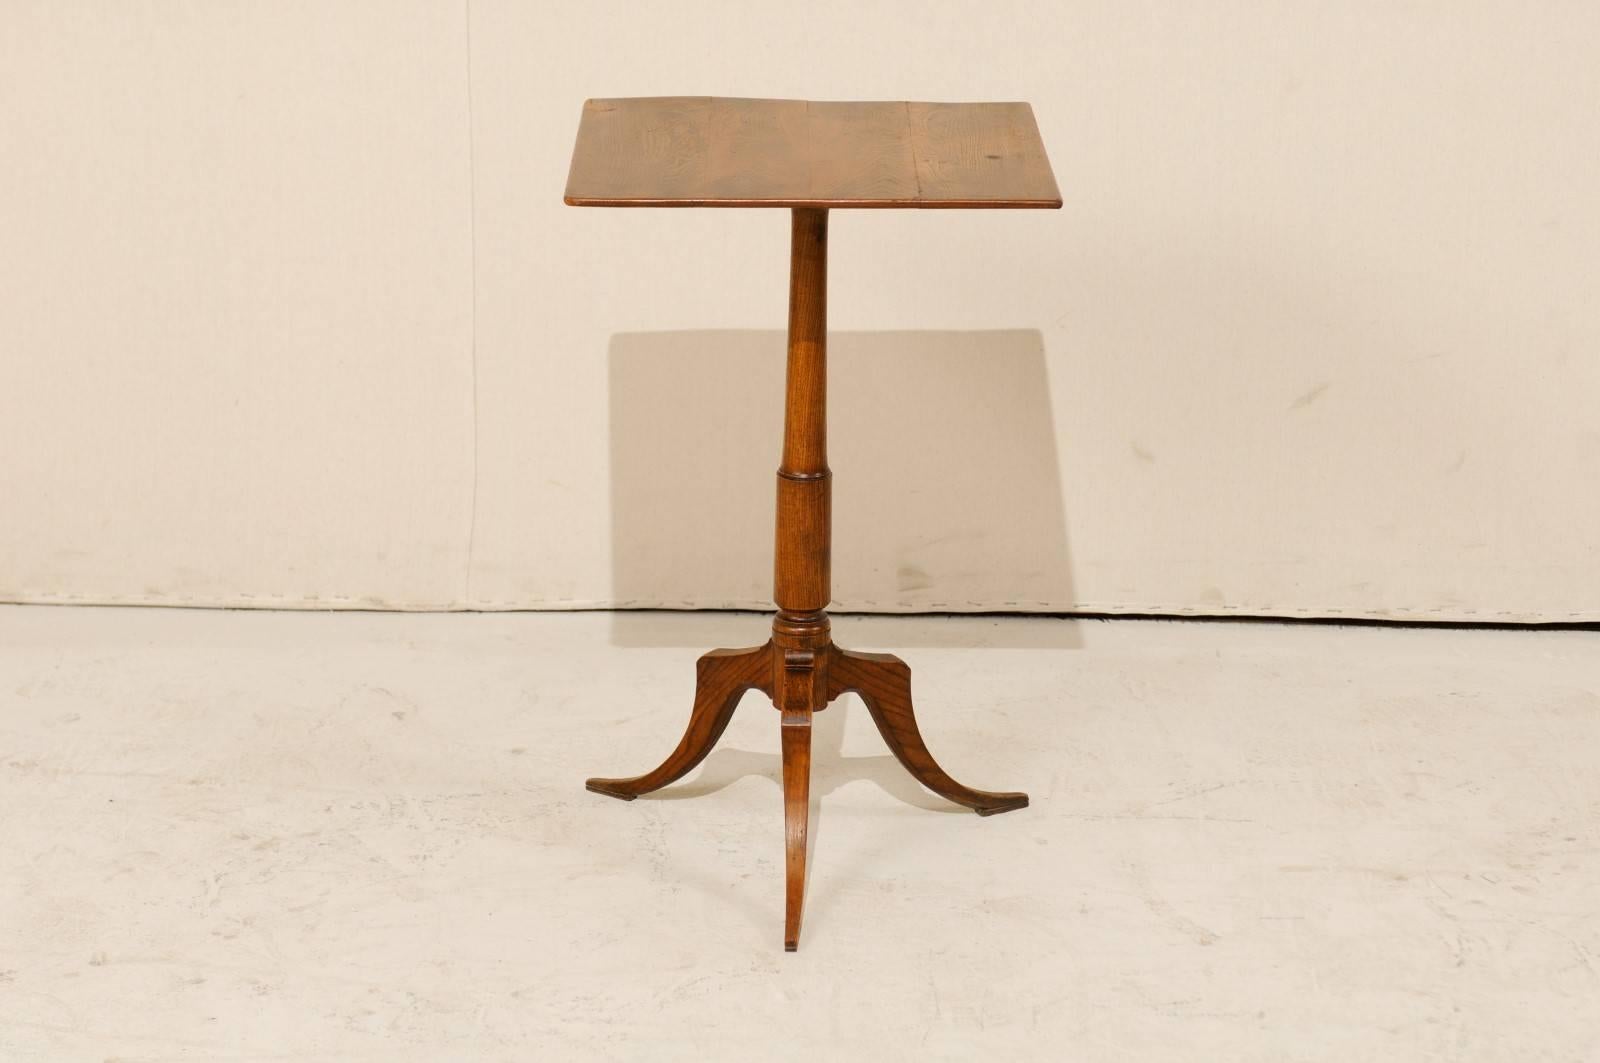 A Swedish 19th century wood side table. This Swedish table of elmwood, from the mid-19th century, features a square shaped top and slender pedestal column which that is raised upon delicately sloped tripod feet. This table is in very good antique